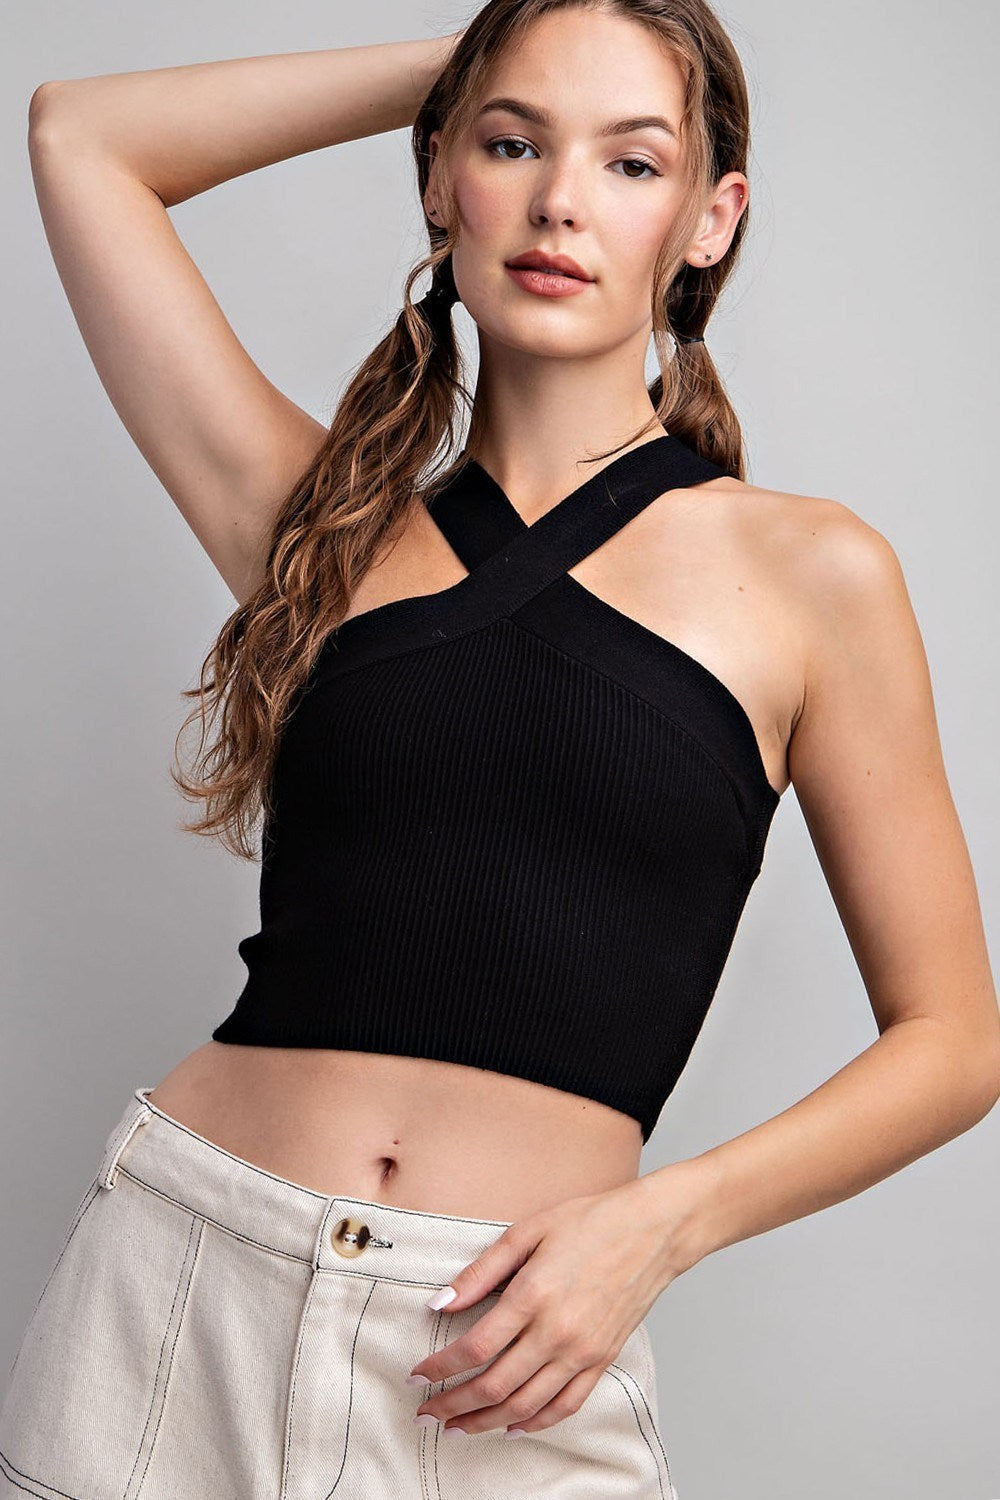 Halter Neck Tank Top in Black by ee:some